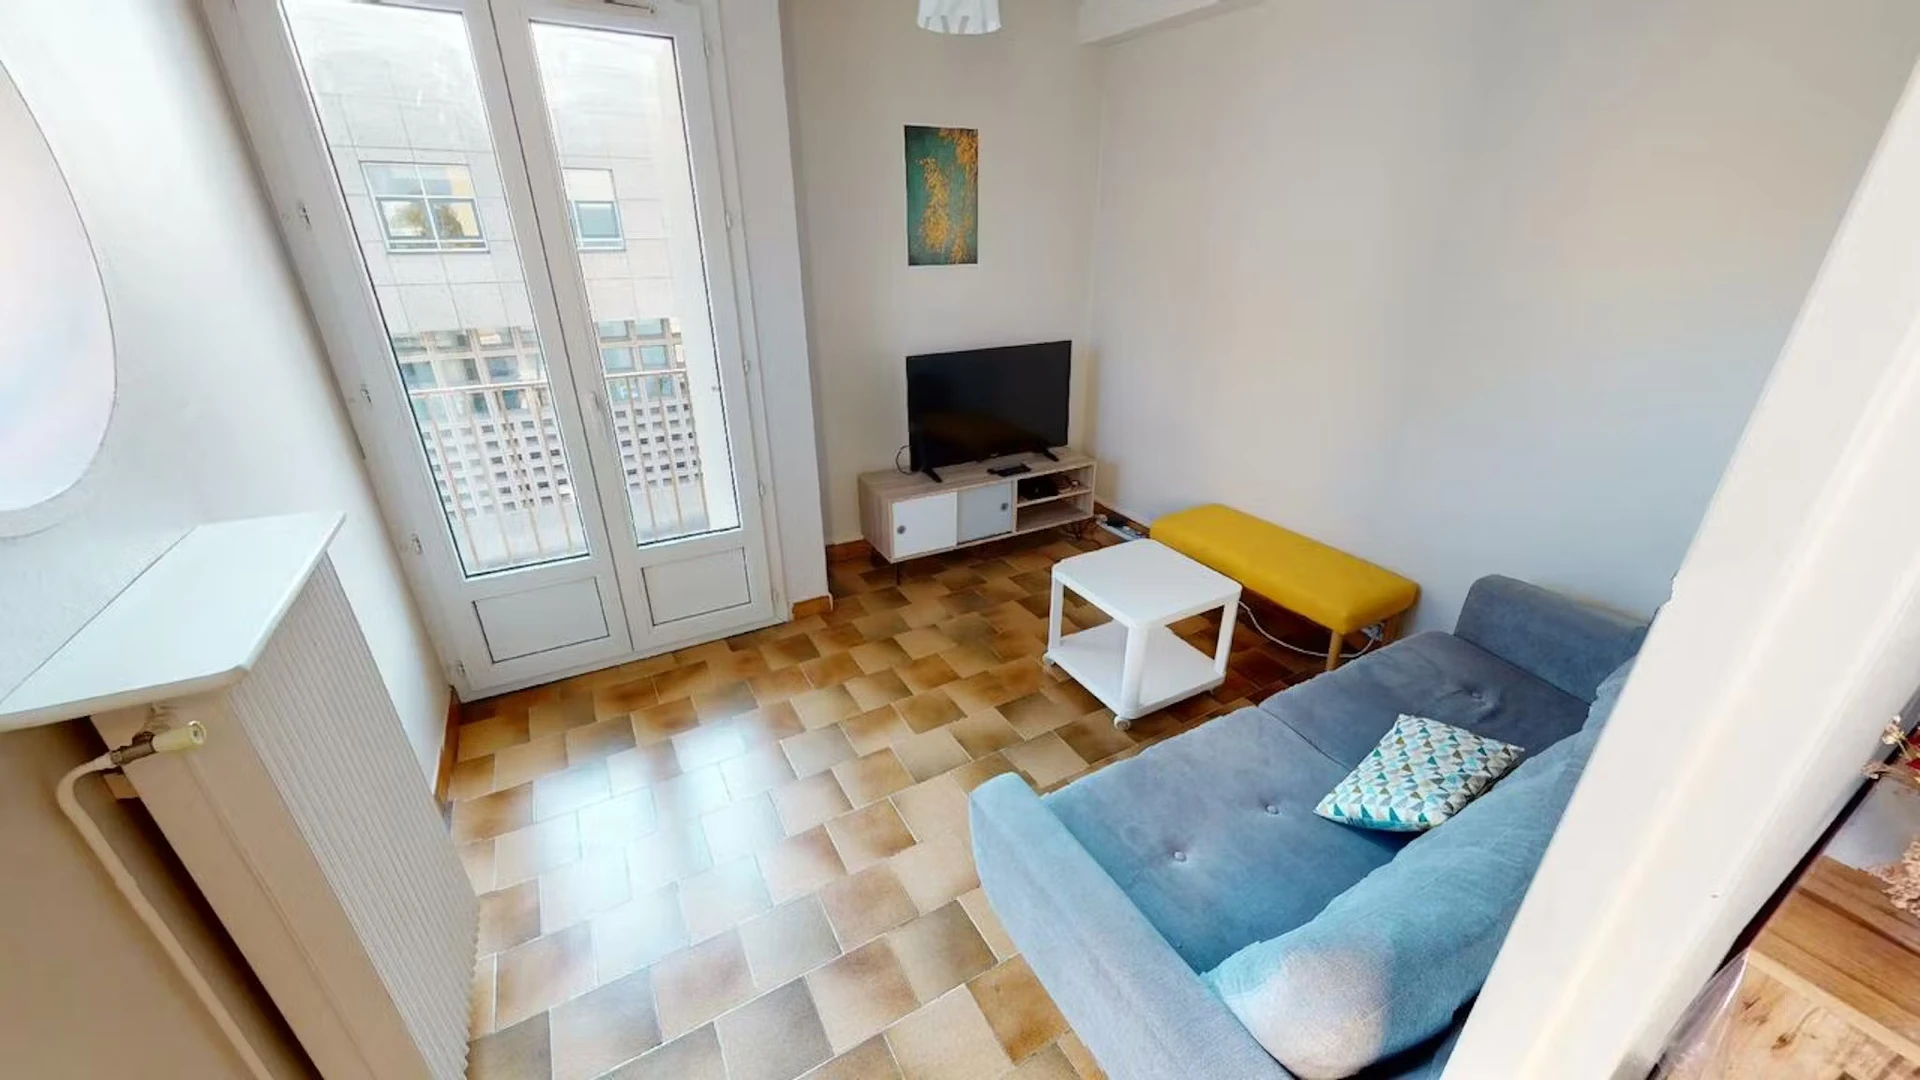 Room for rent in a shared flat in Dijon